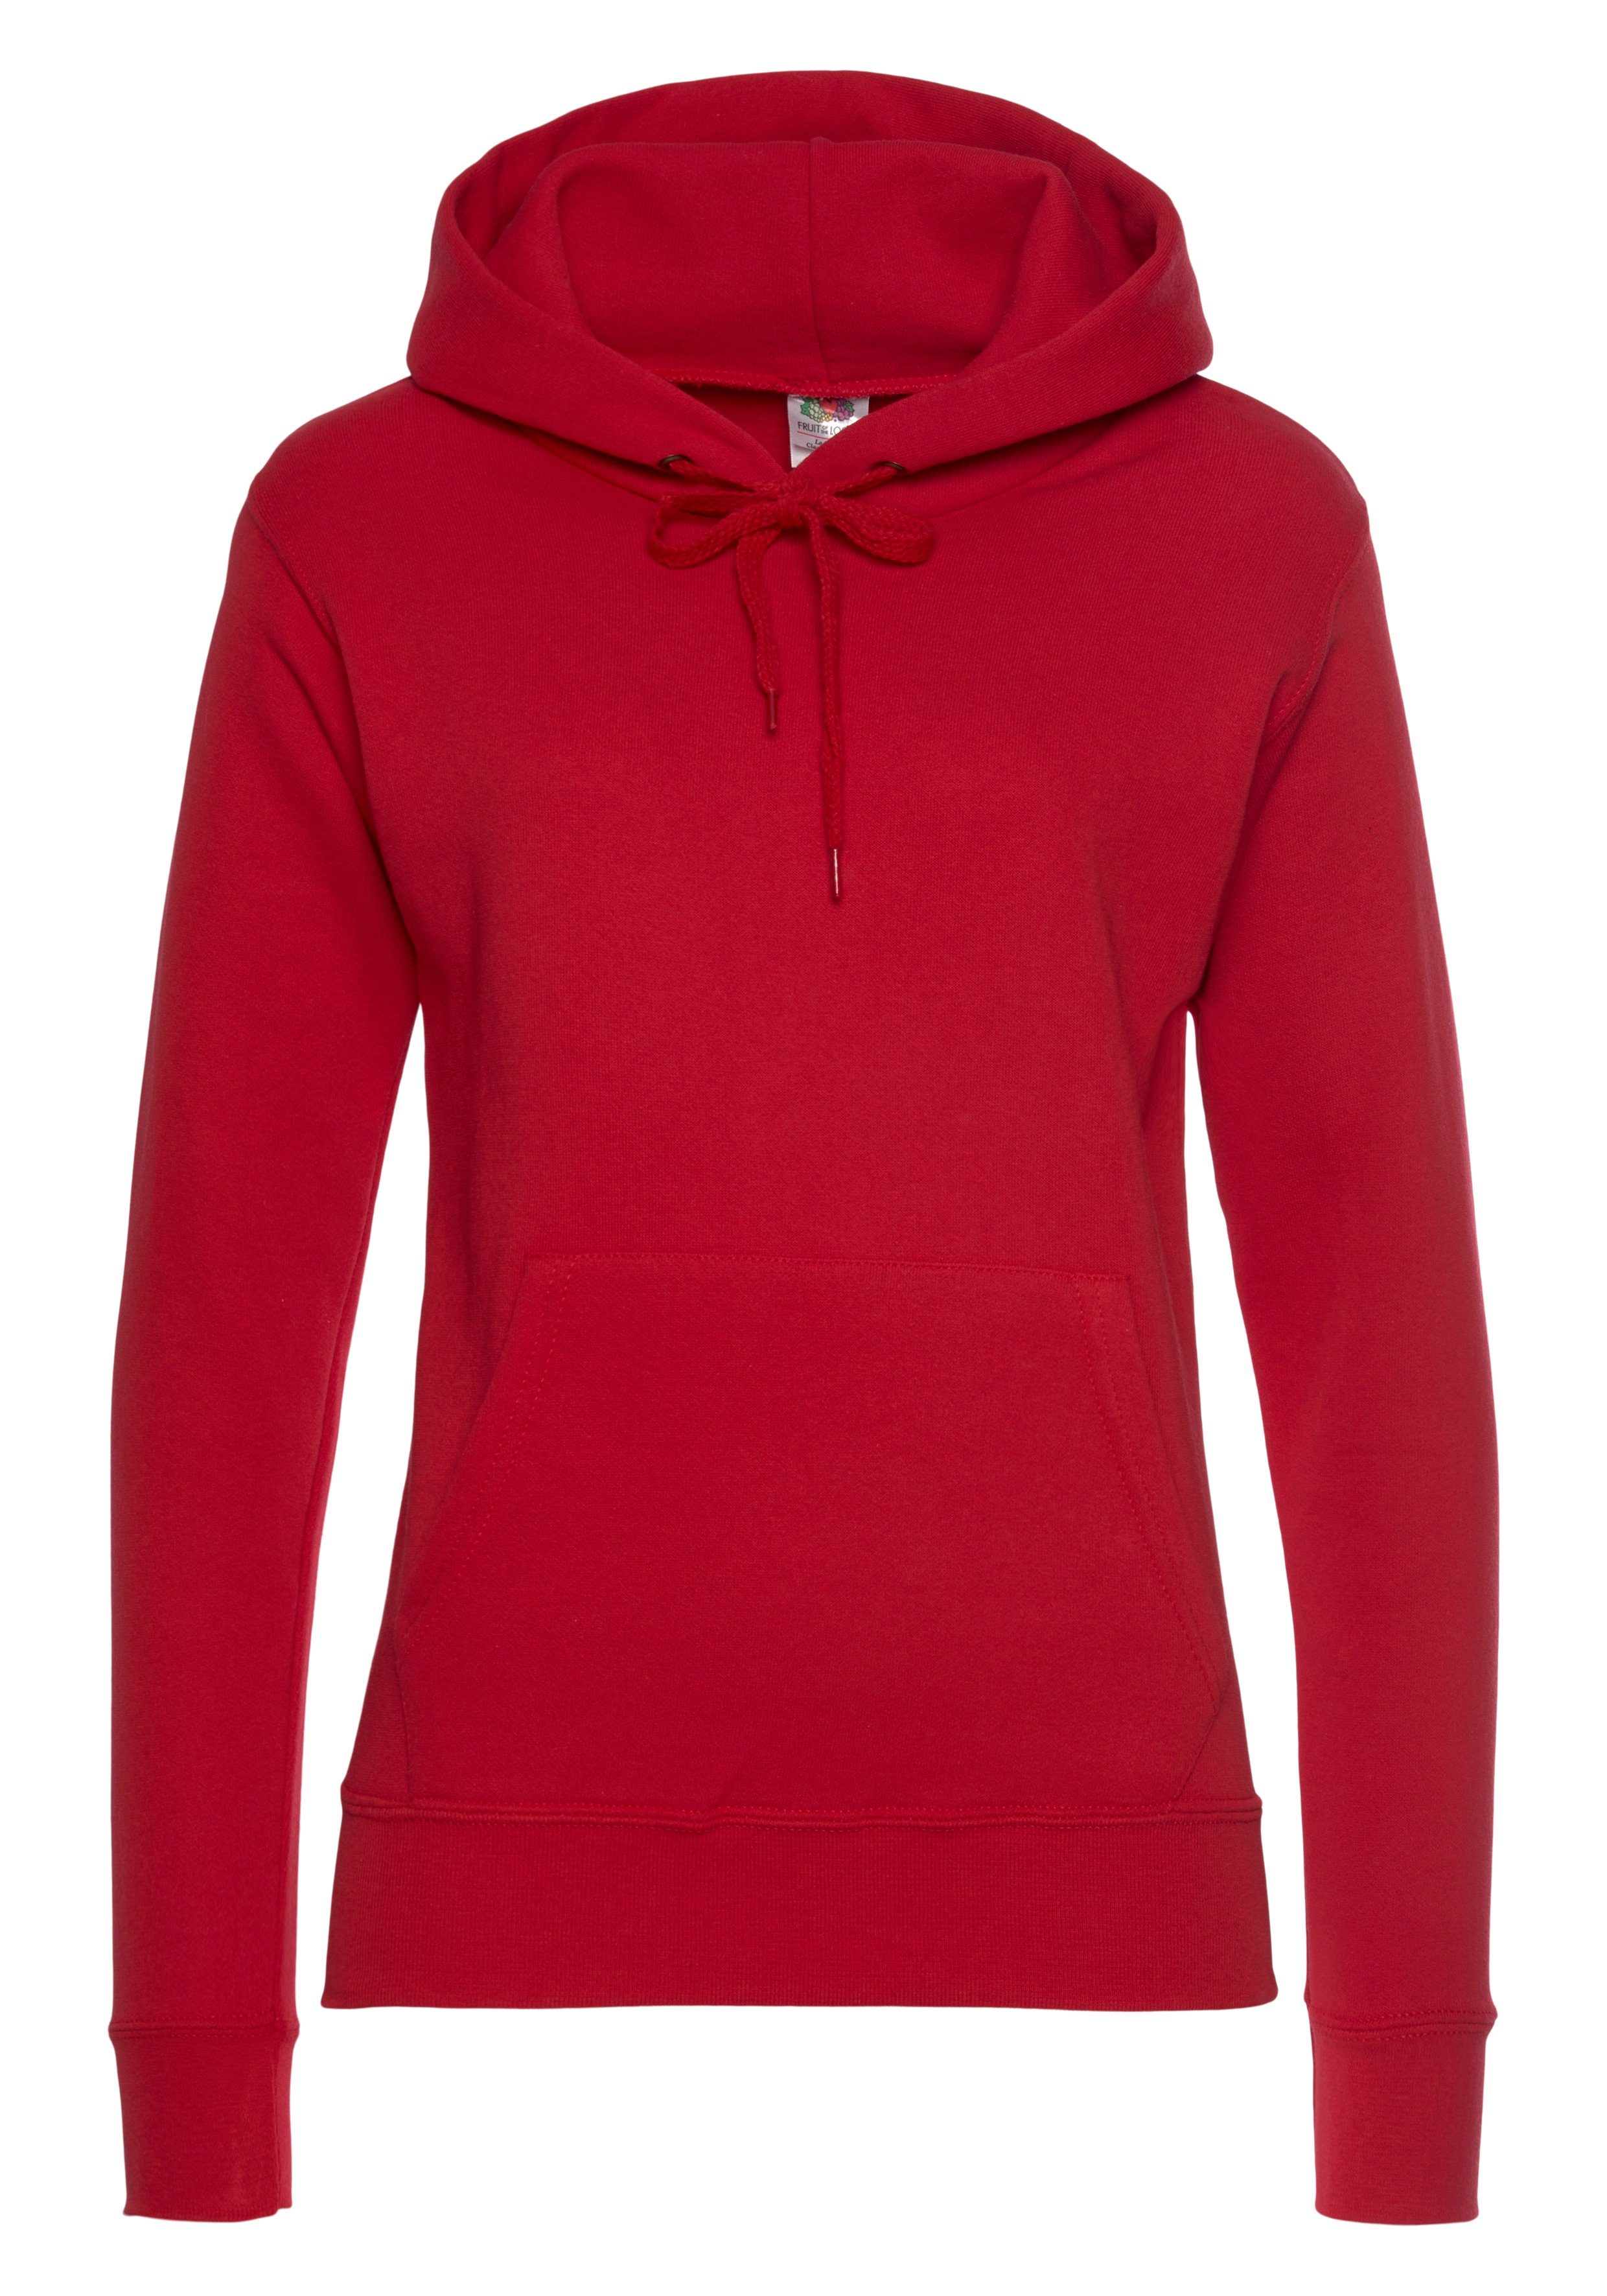 Fruit of the Loom Sweatshirt Classic hooded Sweat Lady-Fit rot